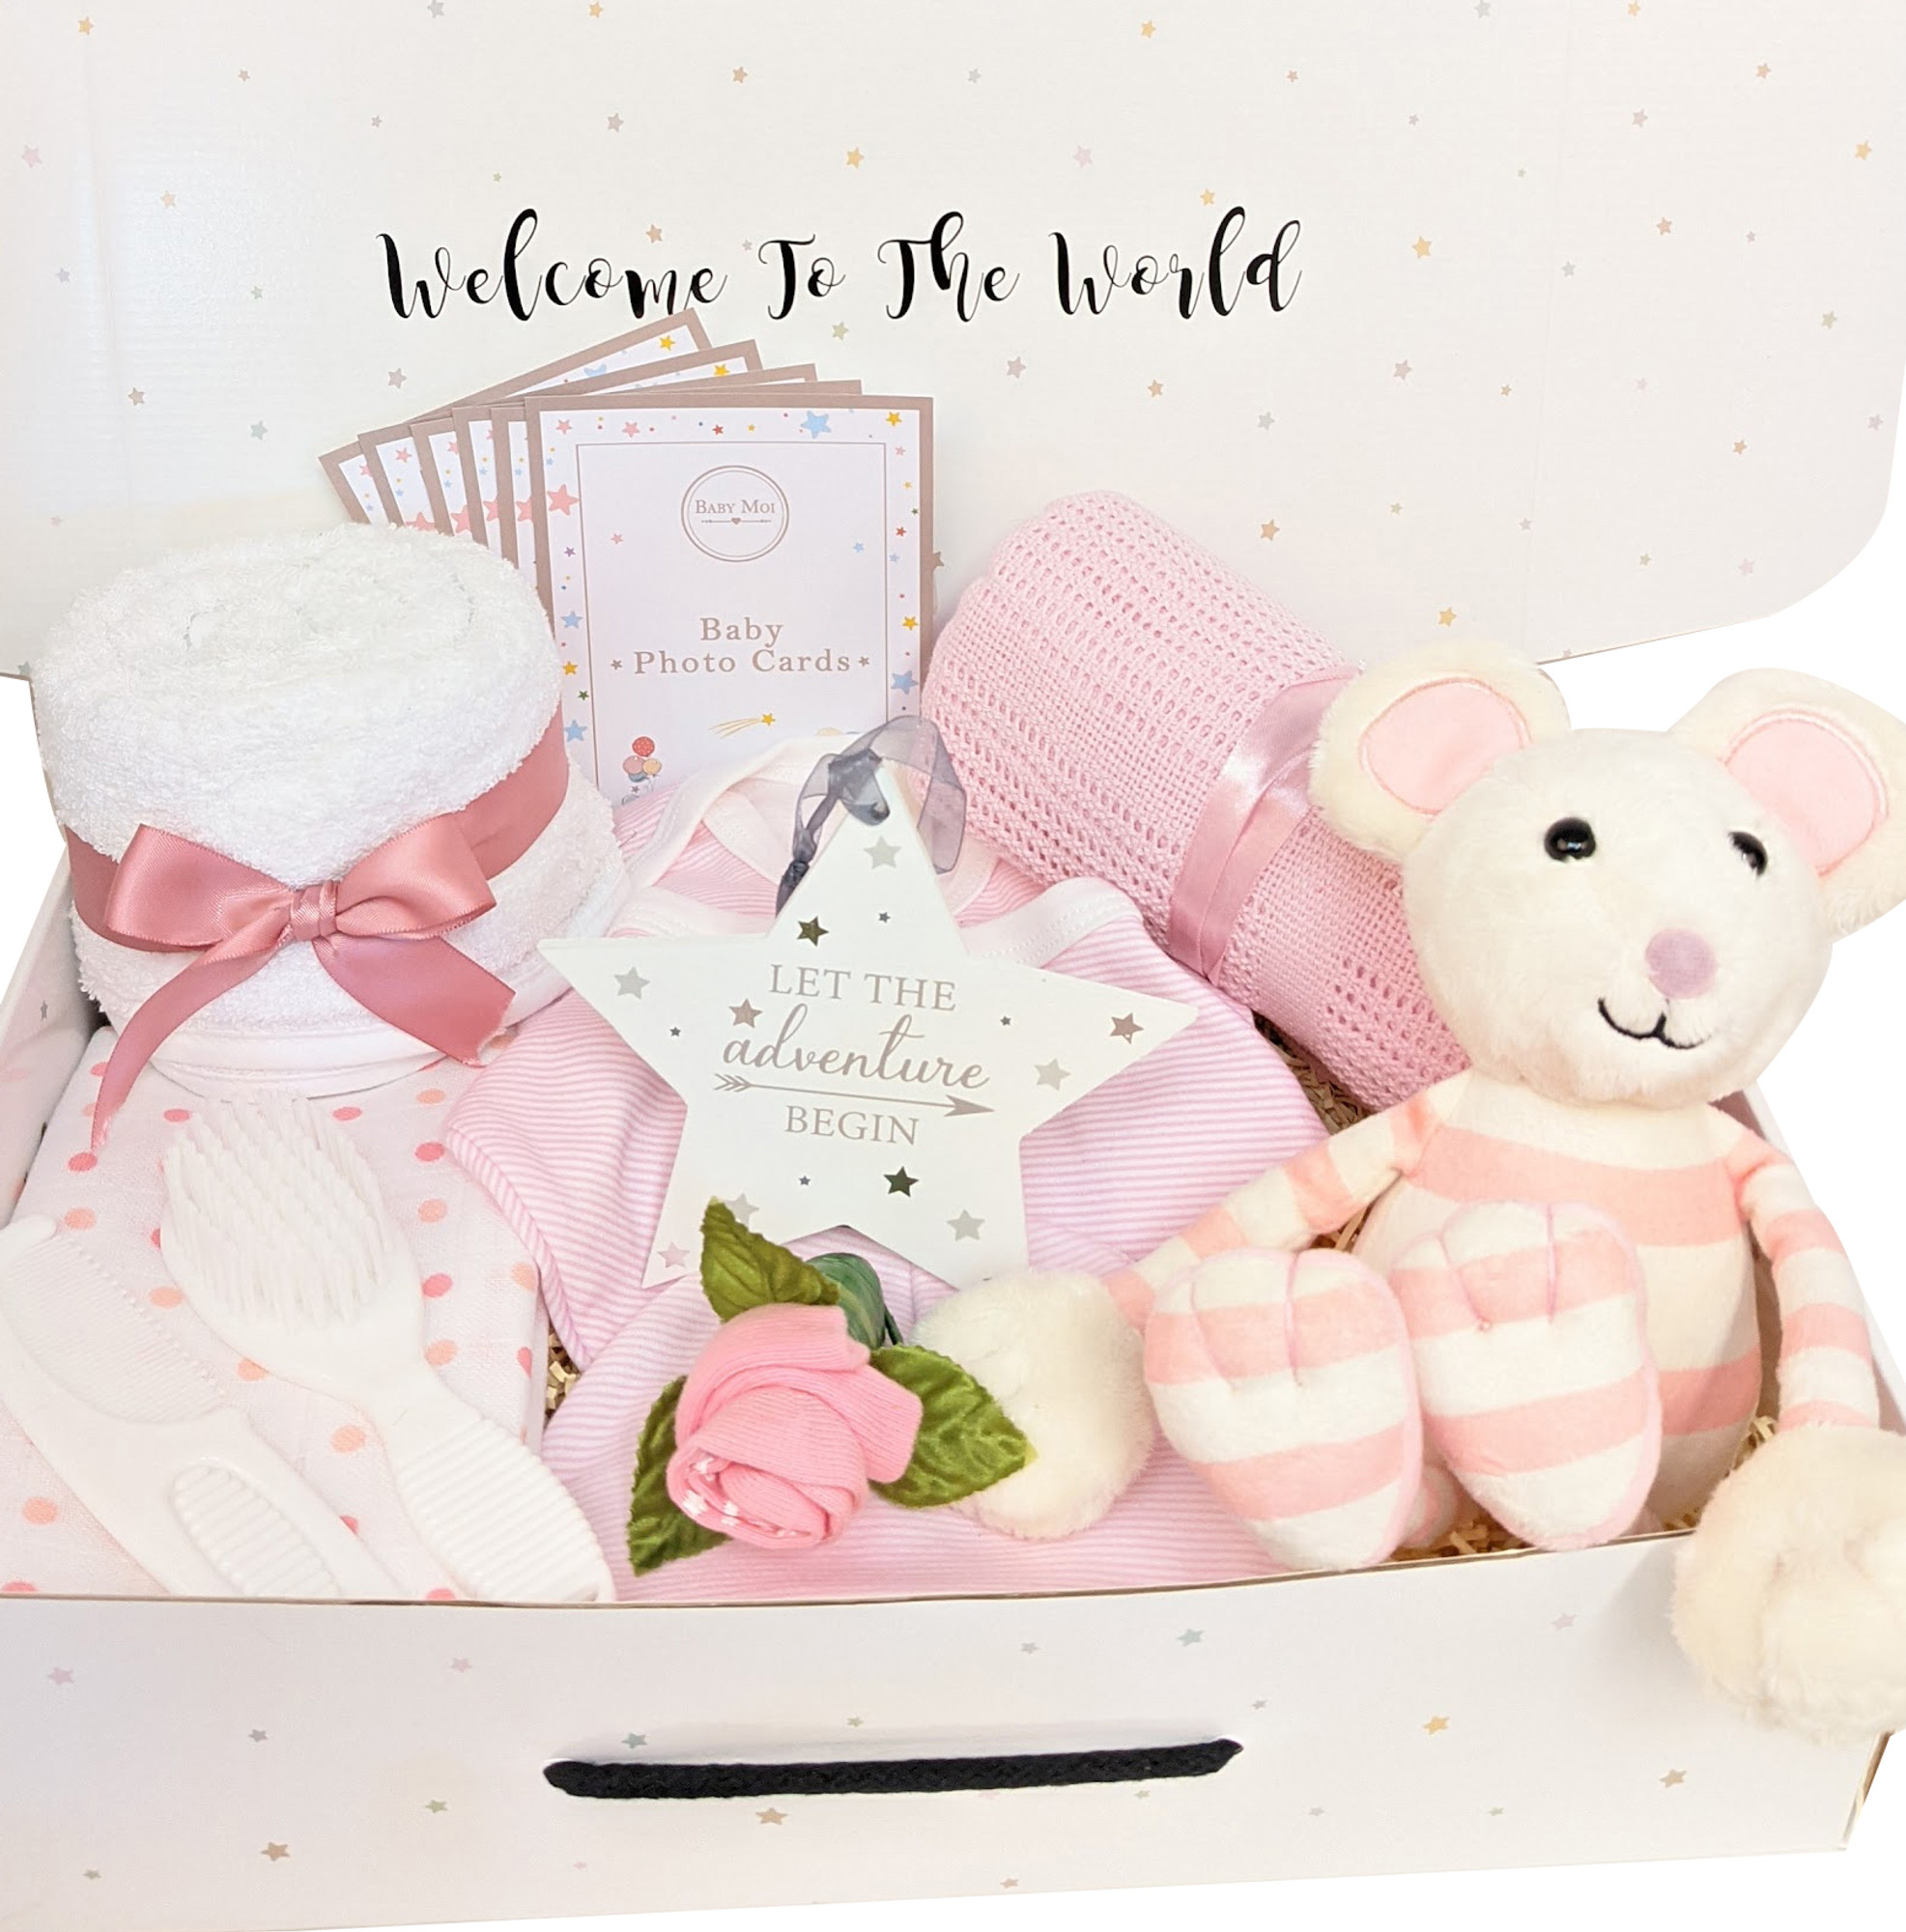 WELCOME TO THE WORLD NEW BABY GIRL GIFT HAMPER Mimi Mouse